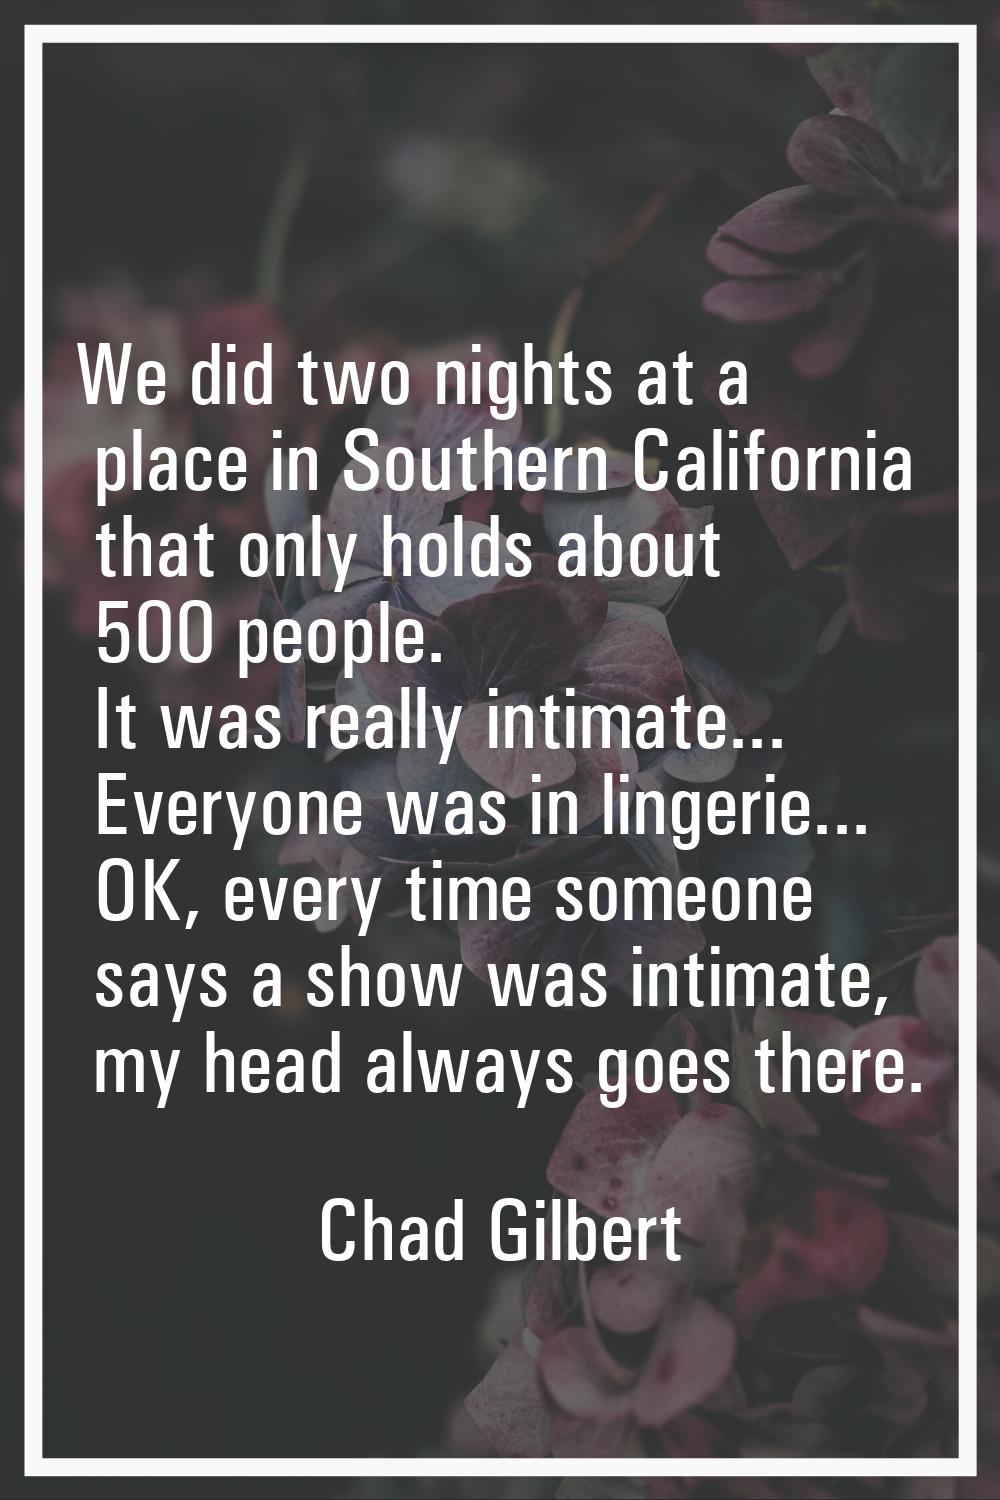 We did two nights at a place in Southern California that only holds about 500 people. It was really